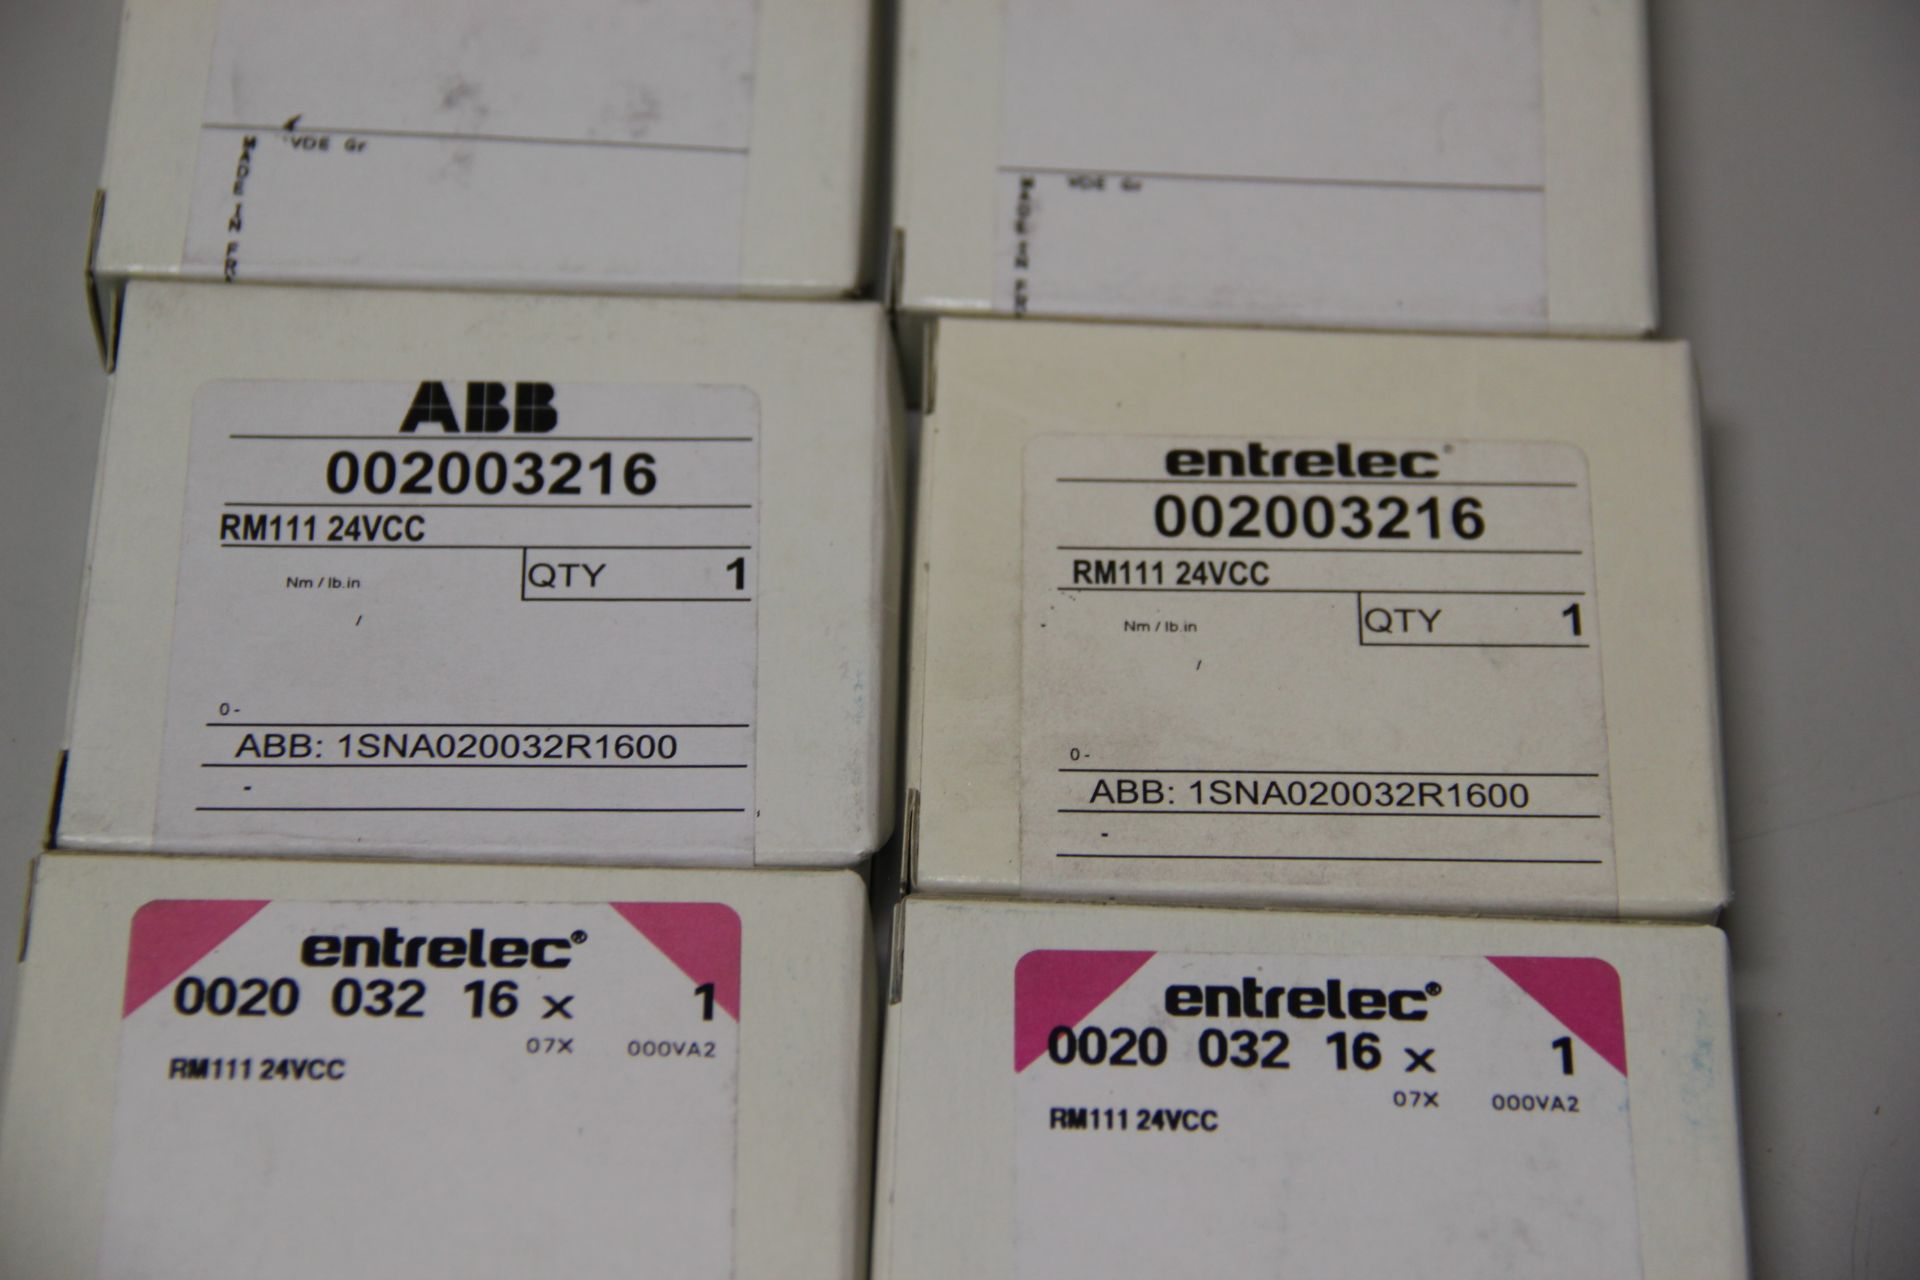 LOT OF NEW ABB ENTRELEC NON-LATCHING RELAY MODULES - Image 2 of 4